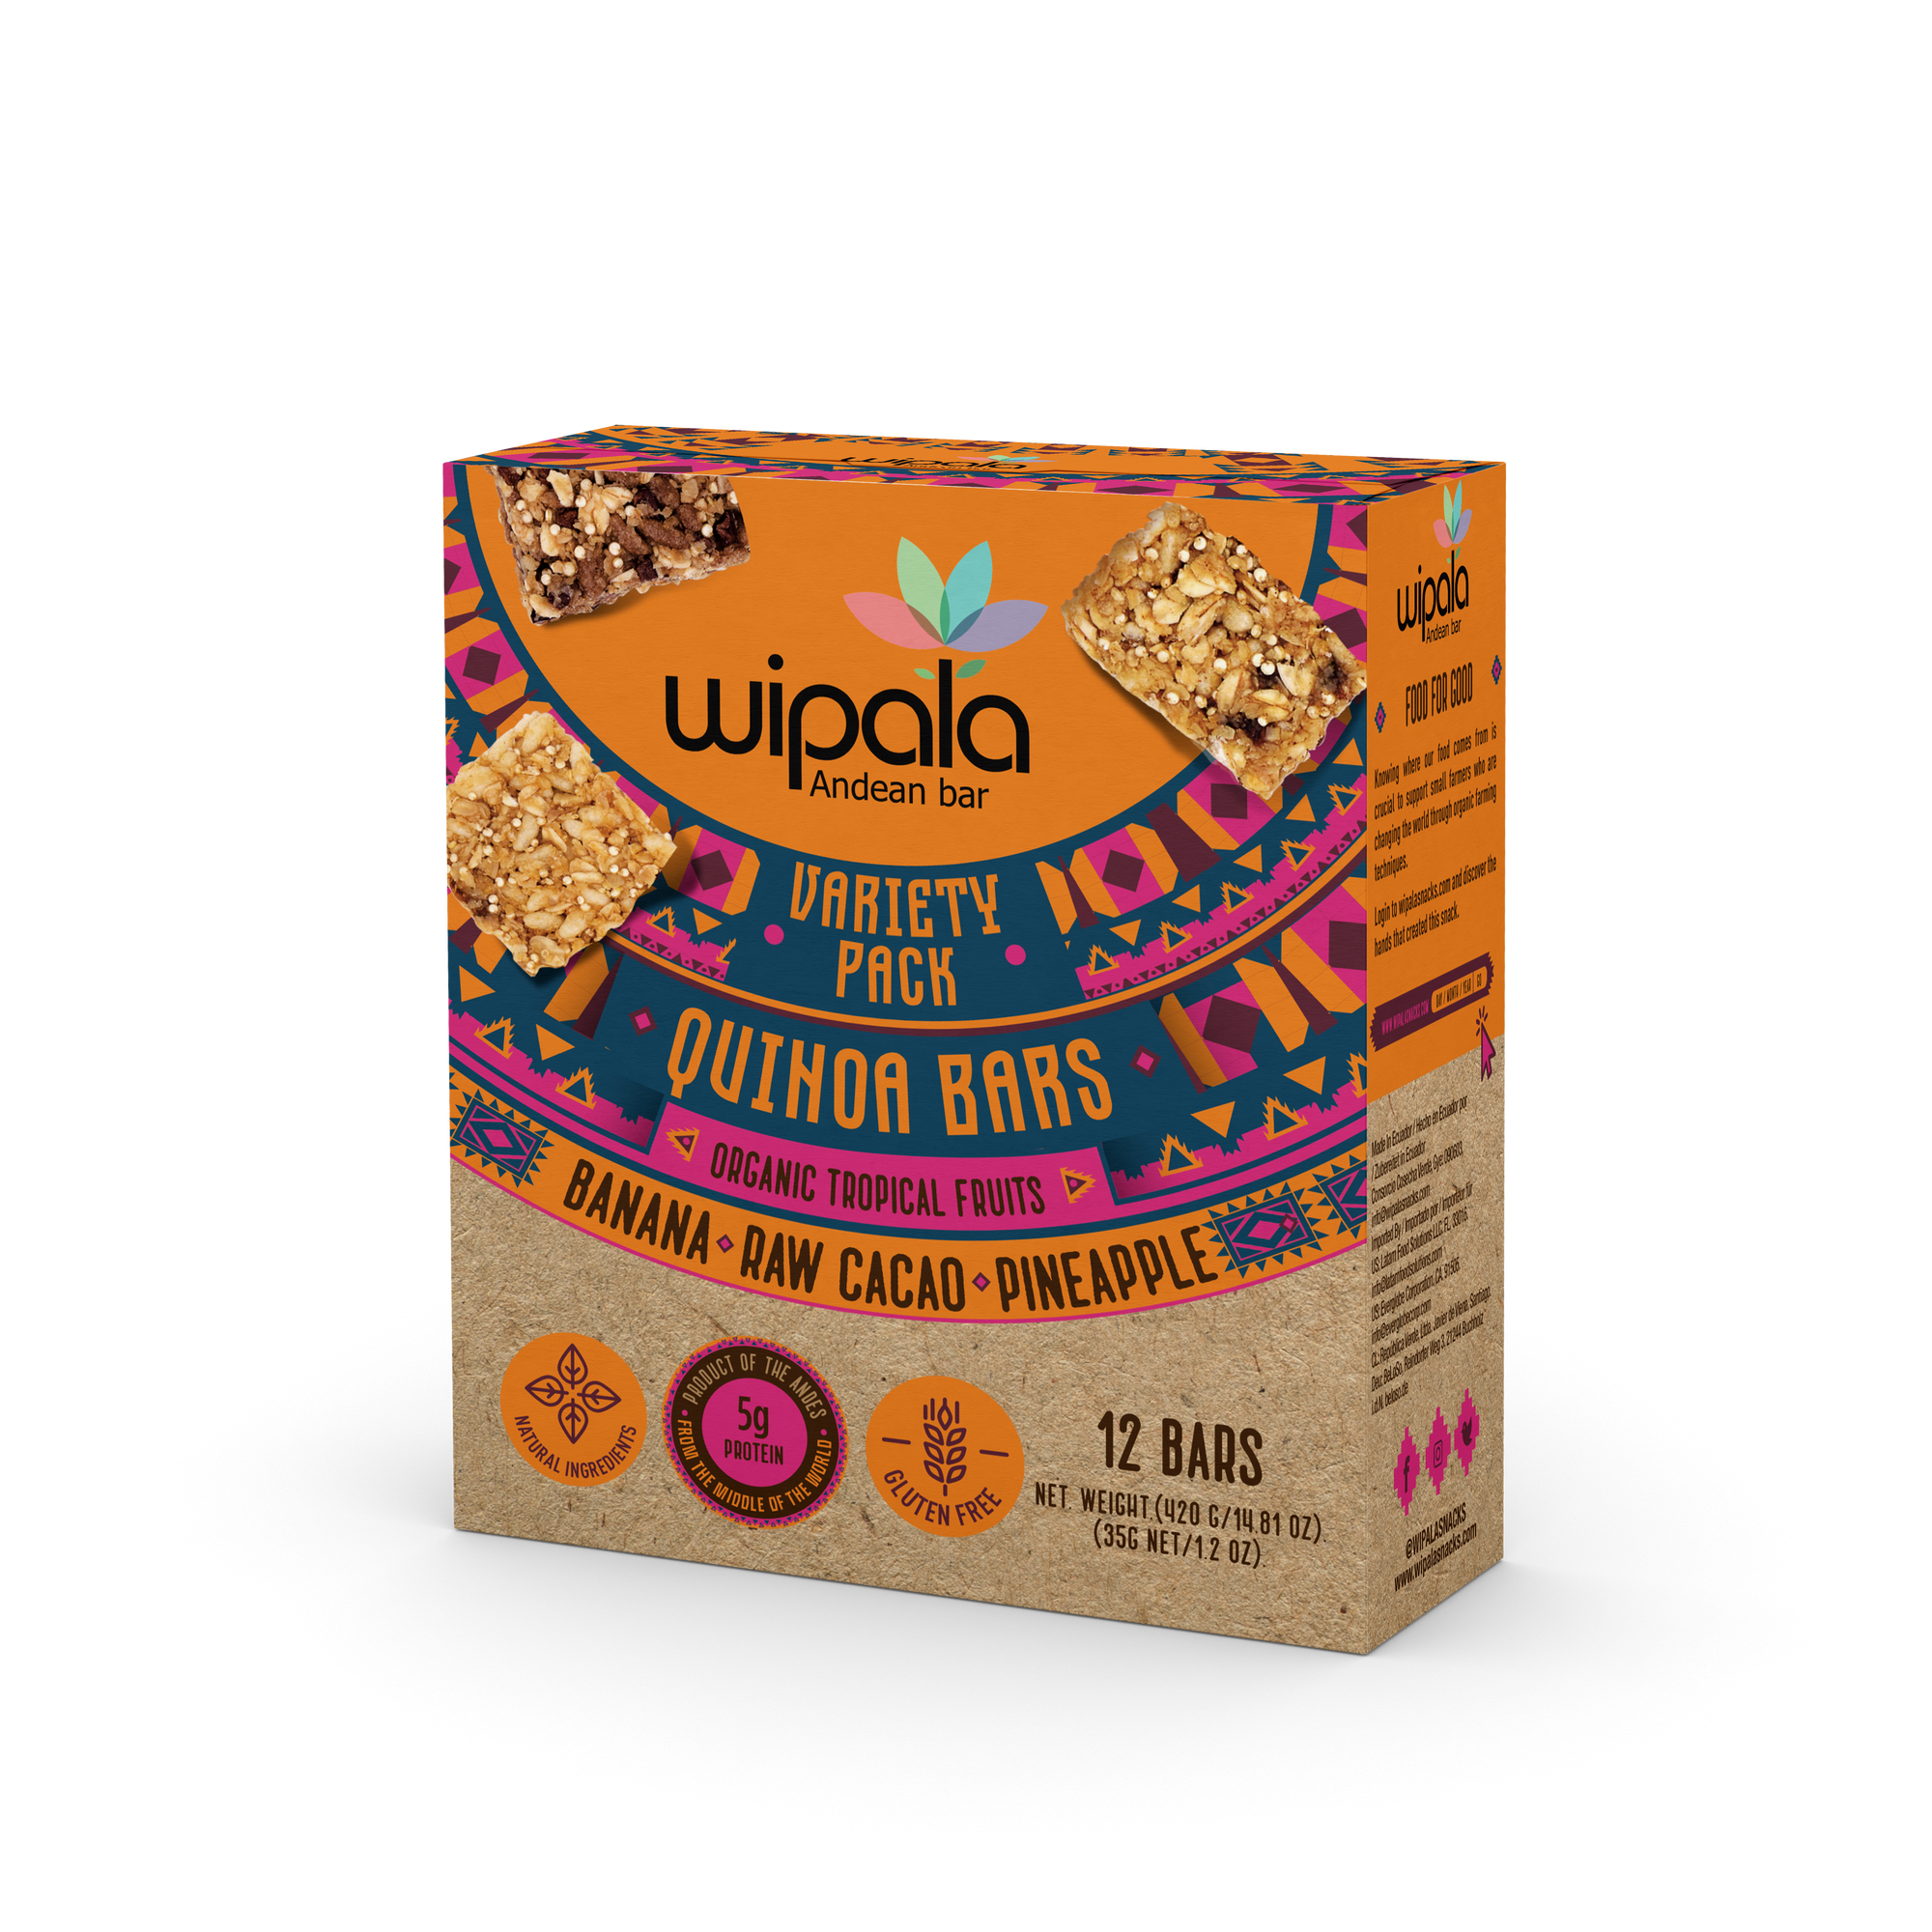 Wipala Andean Bar Variety Mix of Pineapple, Raw Cacao, Banana | Healthy Energy Bar with Organic Quinoa and Andean Lupin, Vegan, Gluten Free, and Non-GMO| 12 Pack - Everglobe Specialty Products